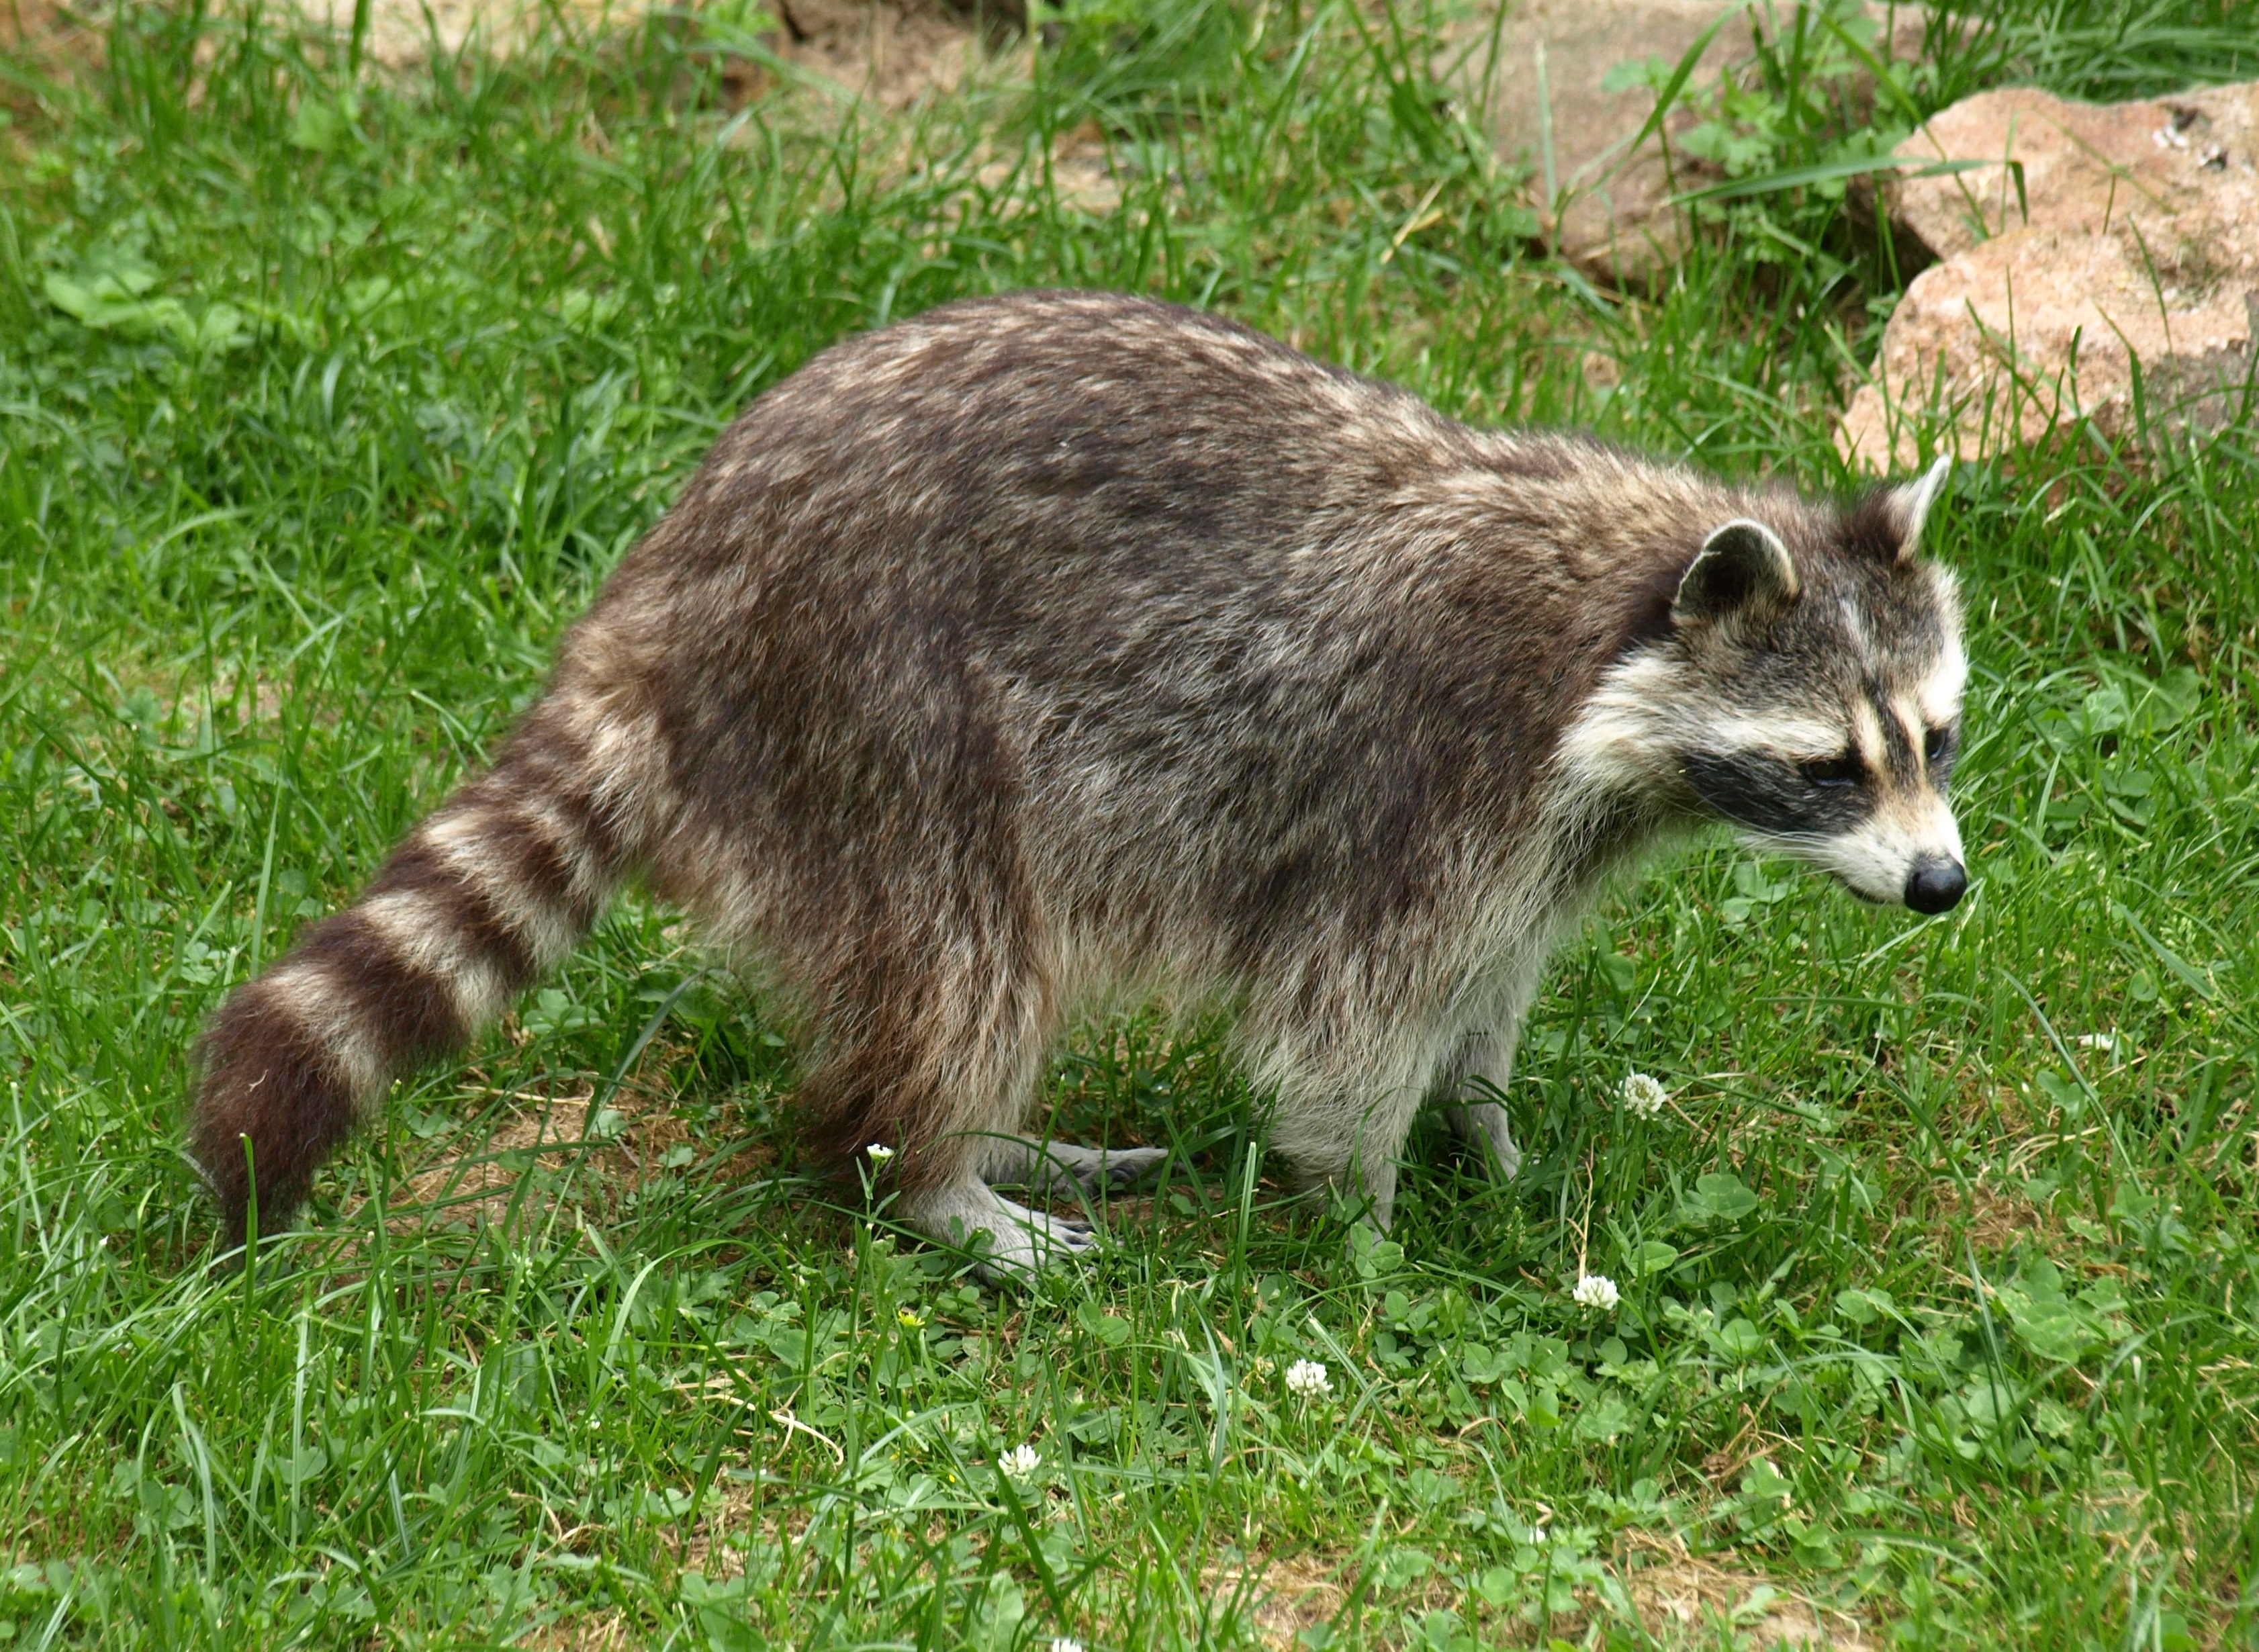 Raccoon trembling, showing possible signs of seizure, wandering in circles